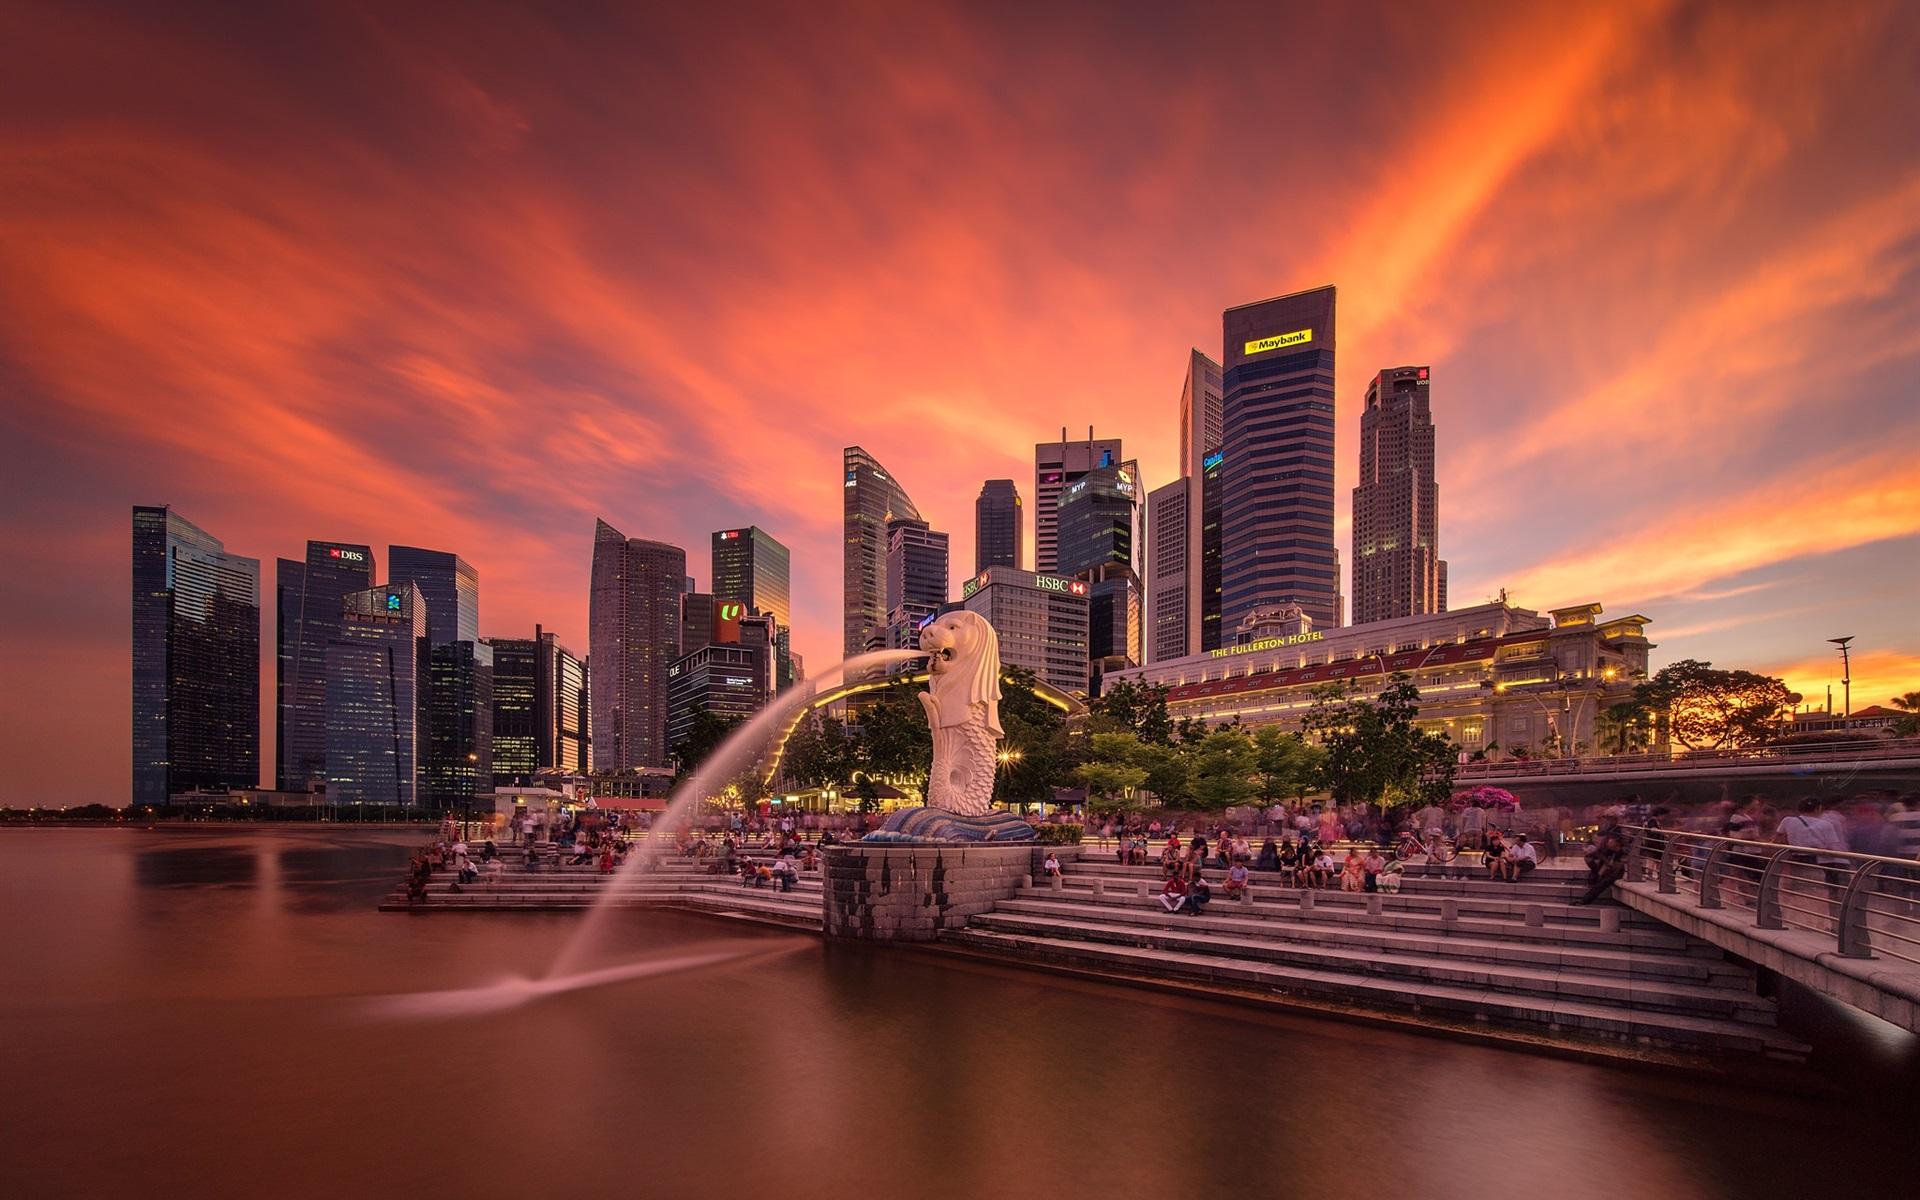 Wallpaper Singapore, fountains, skyscrapers, red sky, dusk